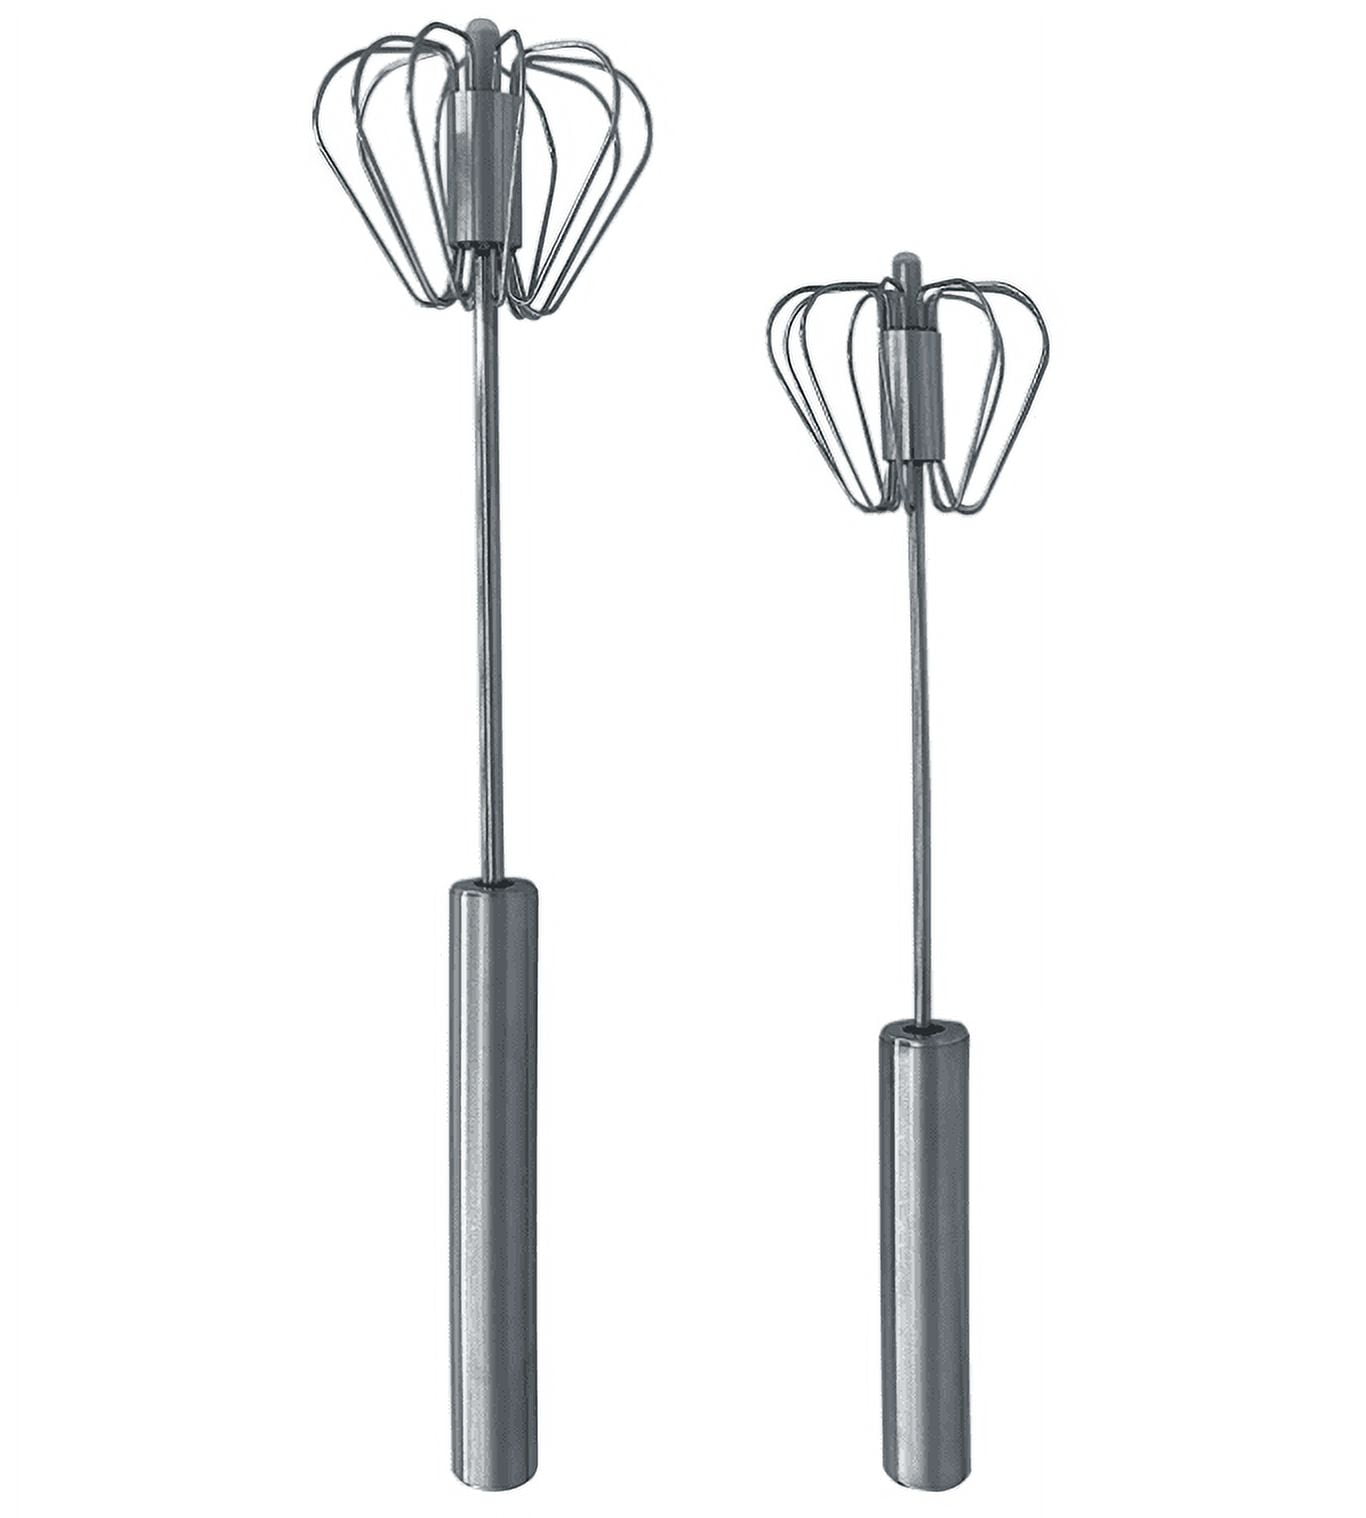 Homgreen 2 Pack Stainless Steel Push Whisk - Easy to Use Manual Hand Mixer  & Plunger Whisk - Make Froth, Foam & Whipped Cream - Semi Auto Egg Beater  Plastic Tip Won't